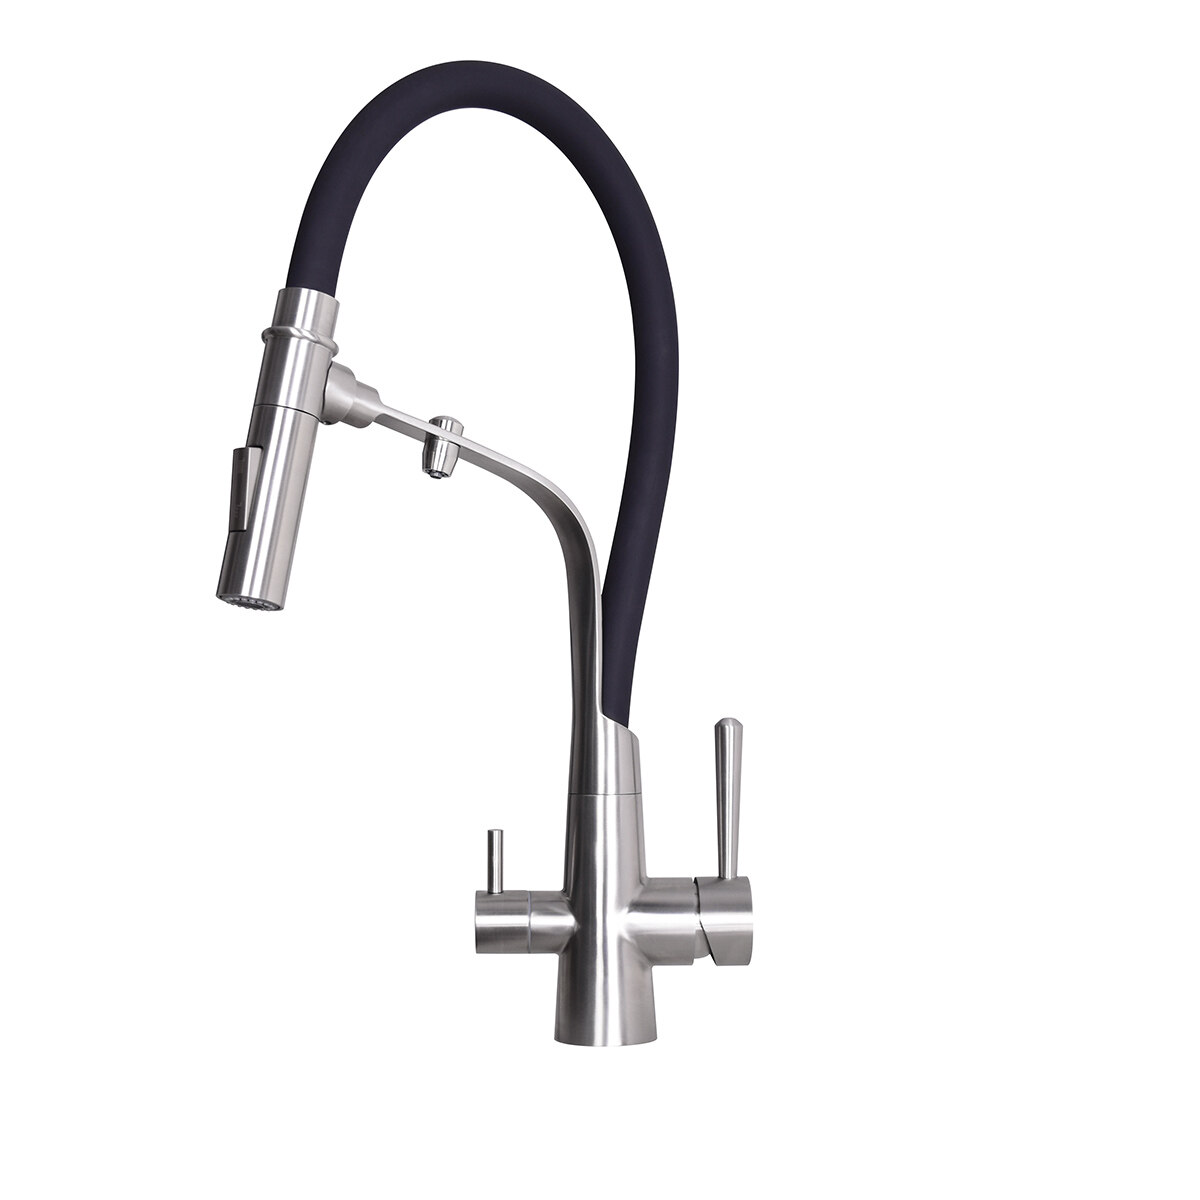 China kitchen sink faucets, high end kitchen faucet manufacturer